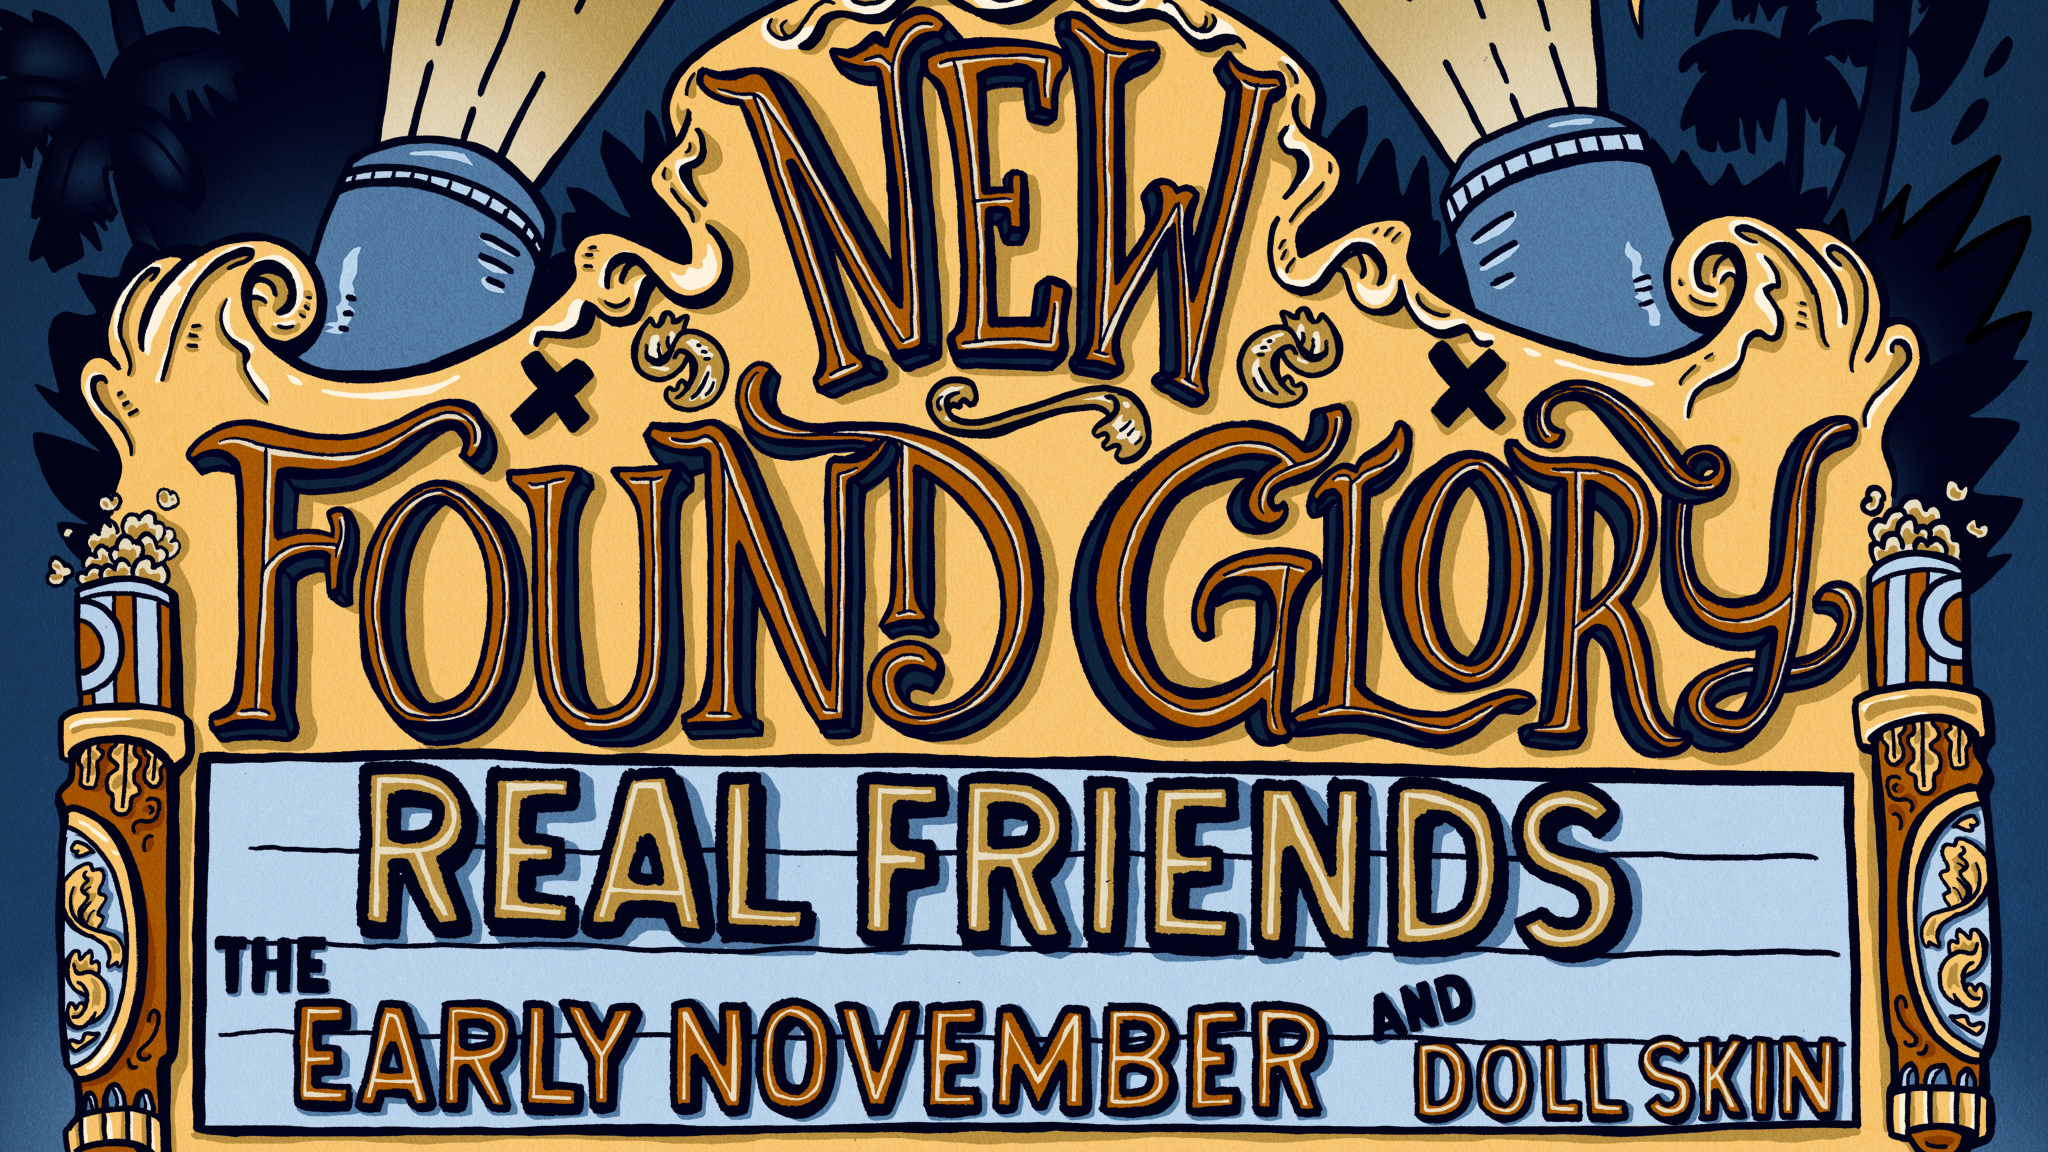 New Found Glory Wallpapers